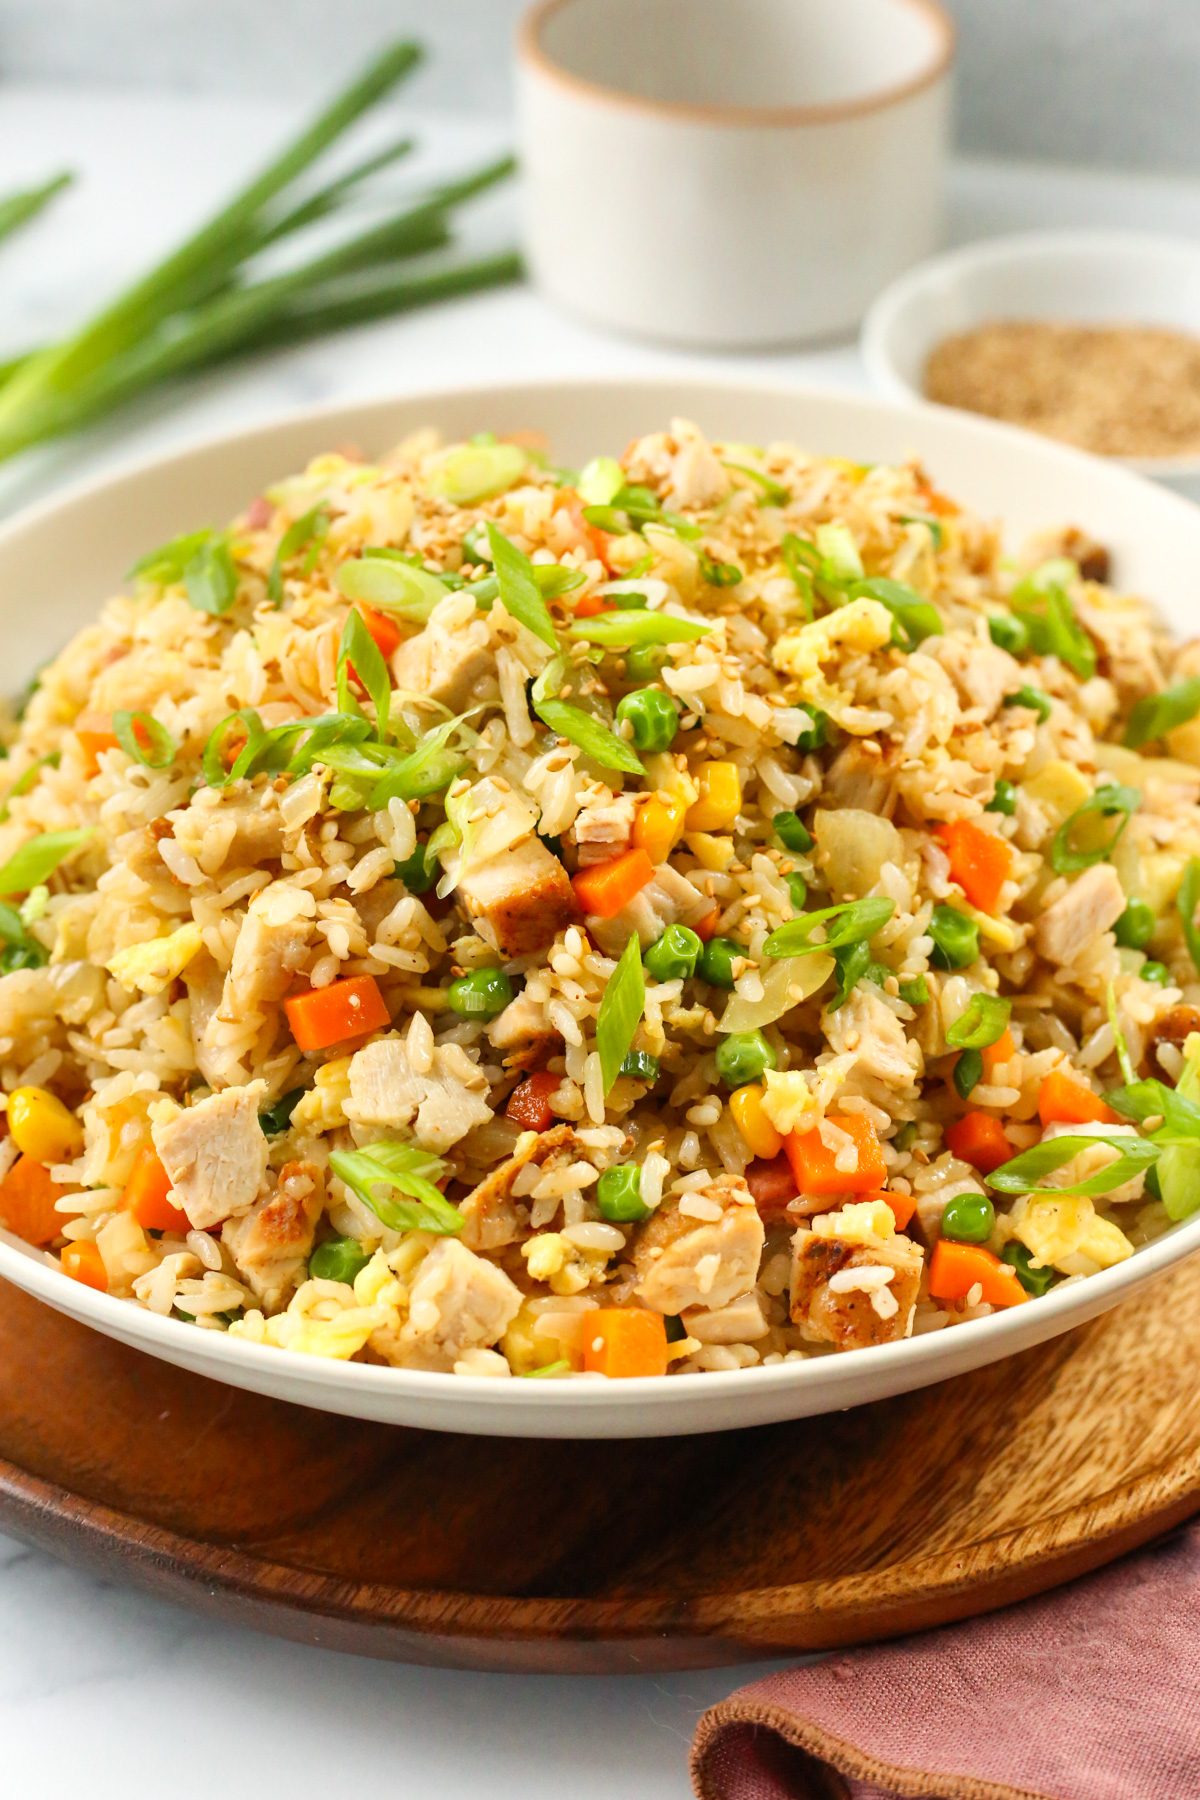 An angled view into a large white serving bowl filled with fried rice, with visible chunks of leftover turkey, green onions, green peas, carrots, corn, and onions with a few toasted sesame seeds sprinkled on top